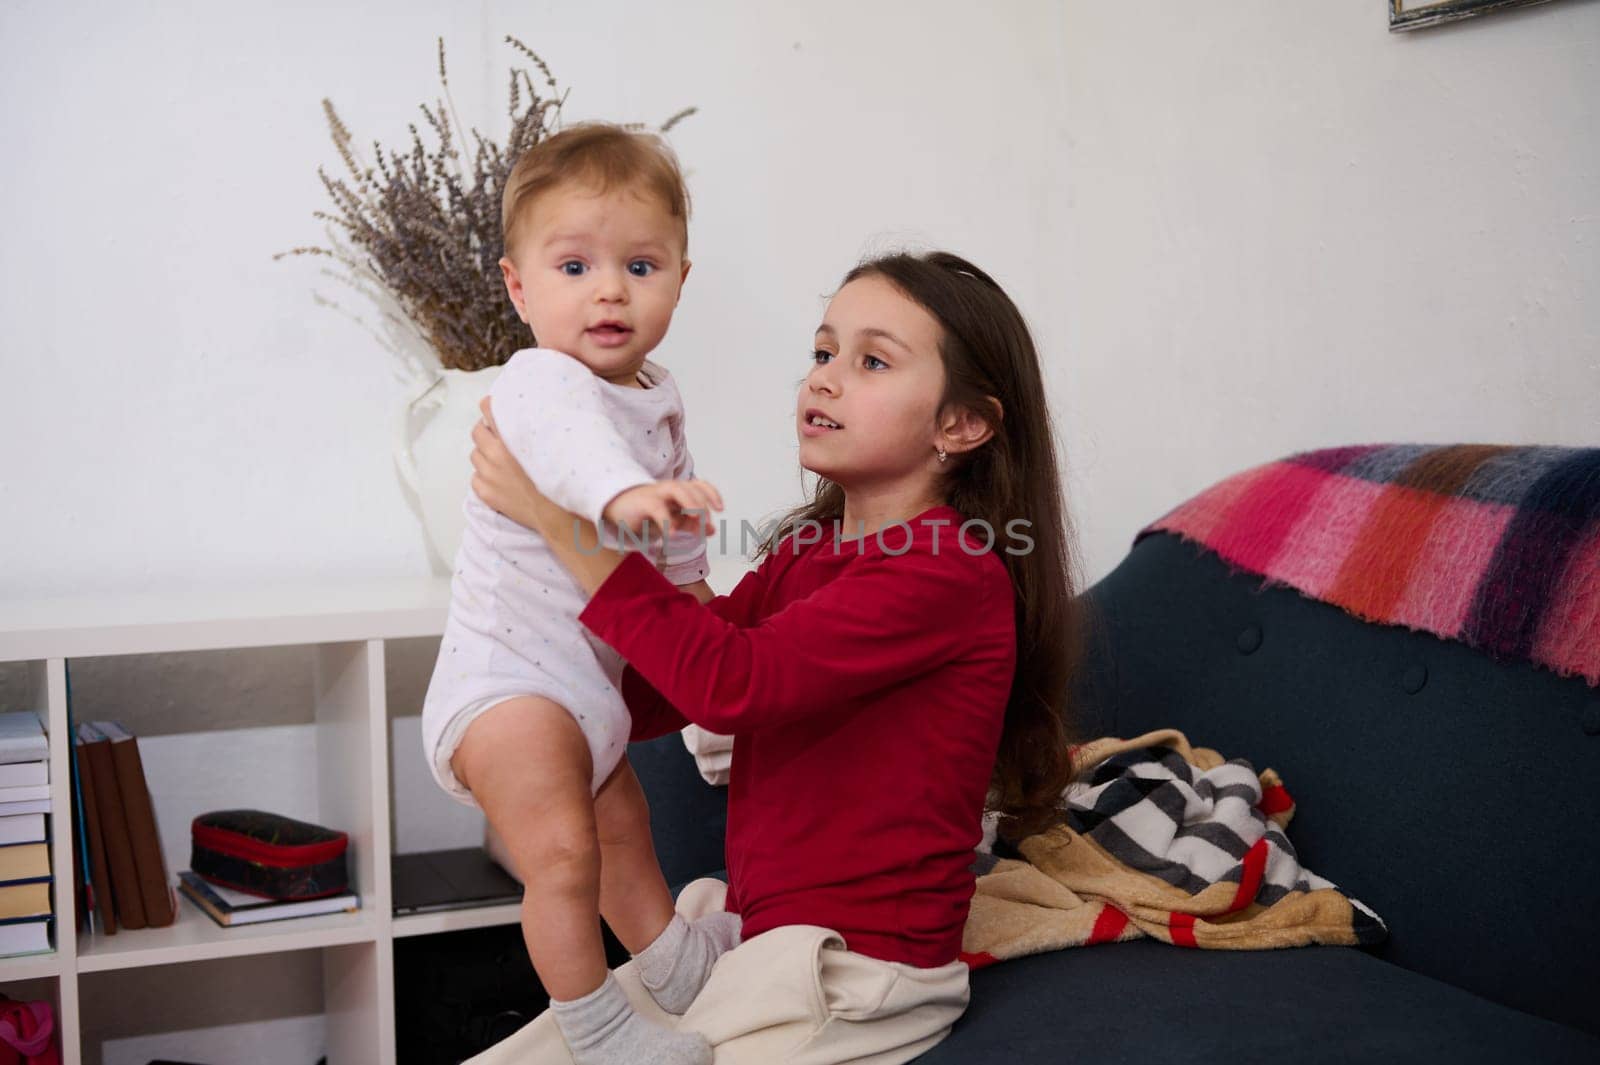 Sister holding her brother, an adorable baby boy on white bodysuit, playing together at home. Family relationships and love concept. Adorable little kid girl 6 years old helps her mom with a baby boy